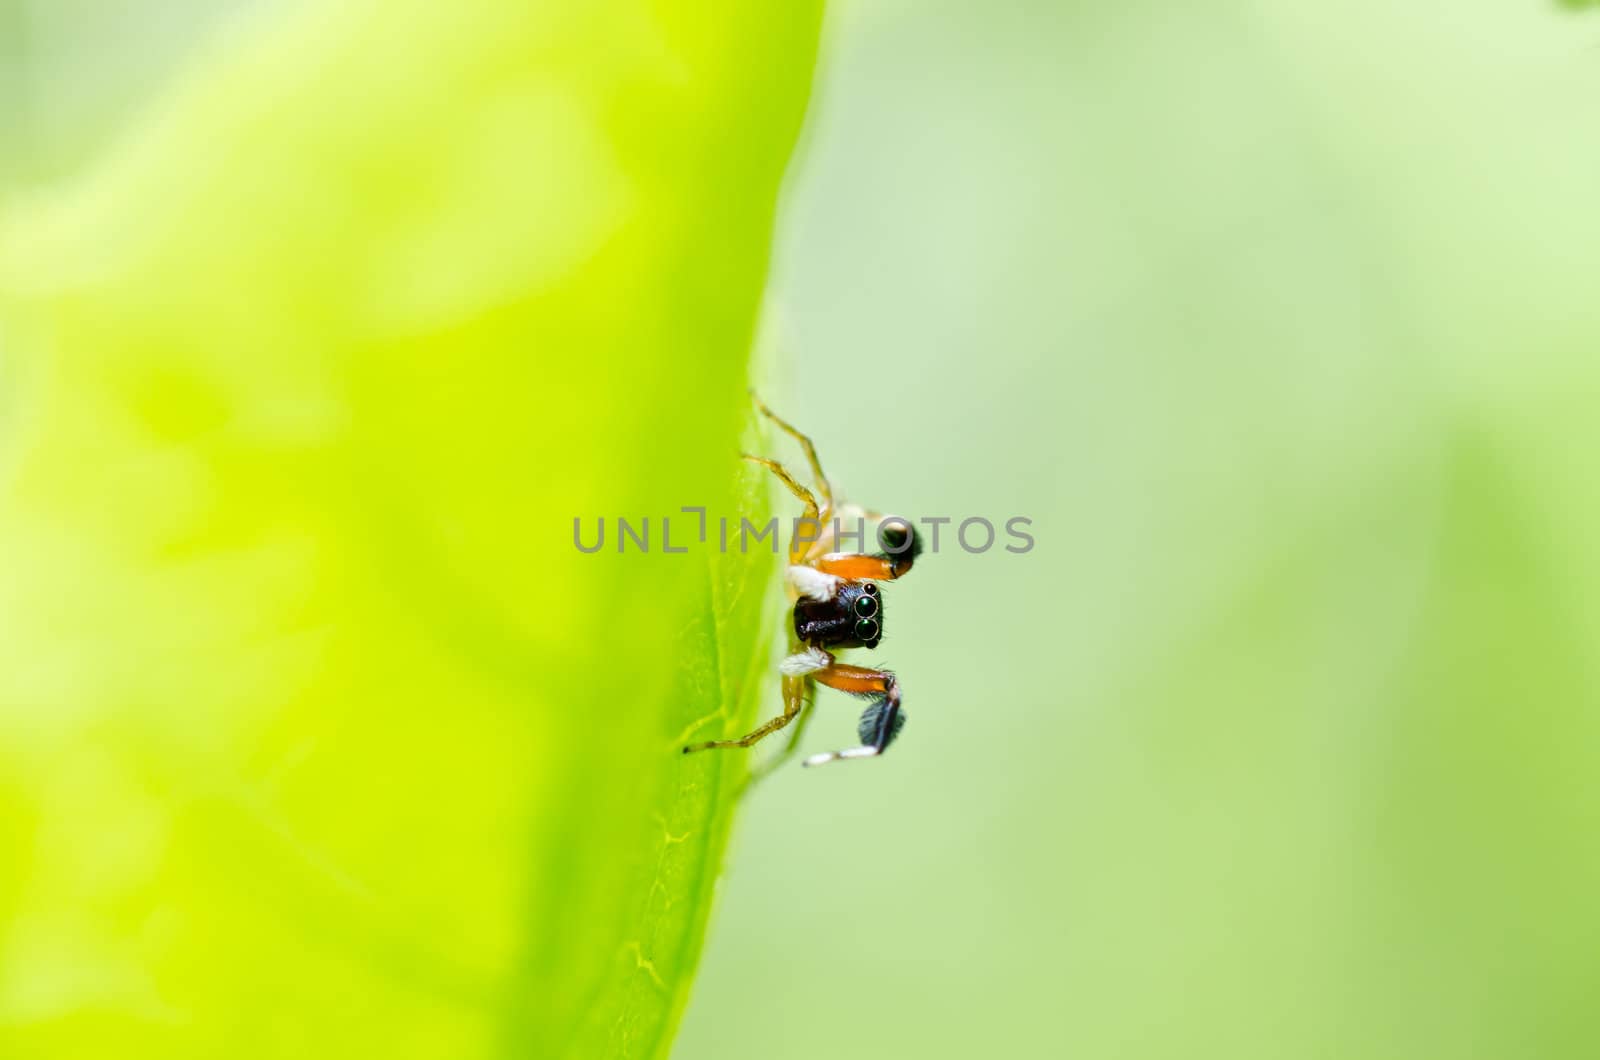 jumping spider in green nature by sweetcrisis